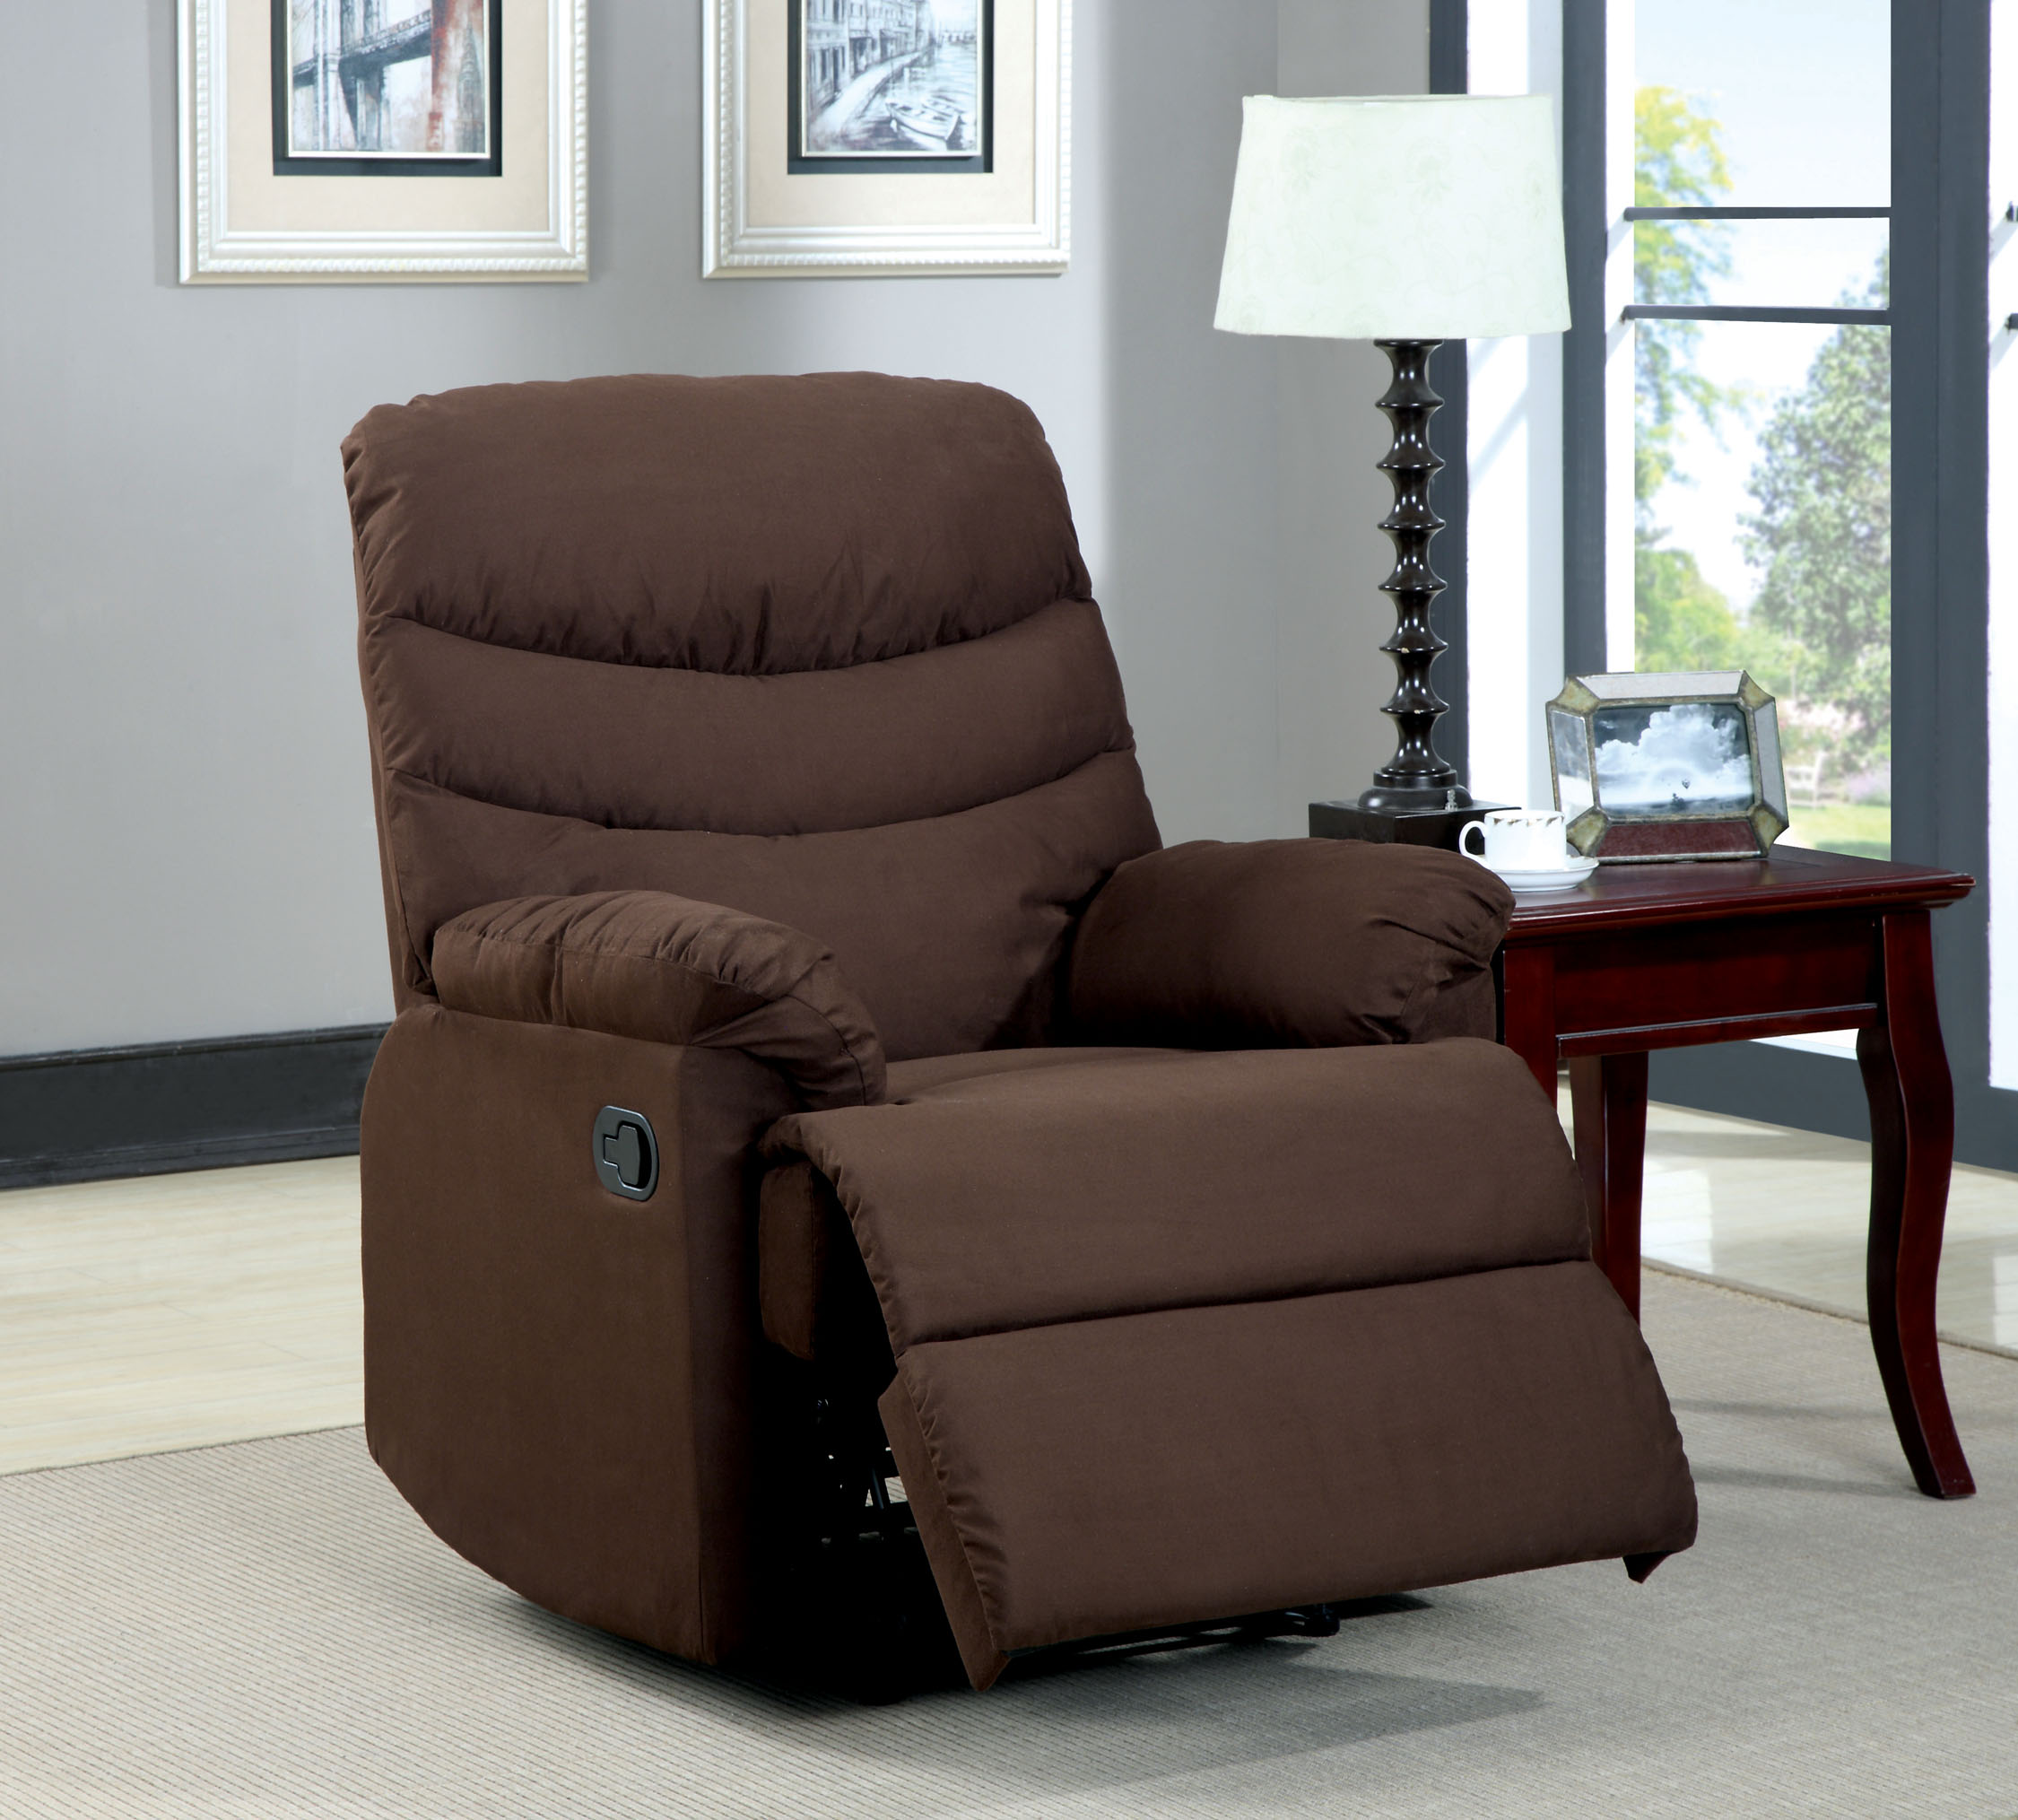 Furniture of America Chambly Padded Fabric Recliner